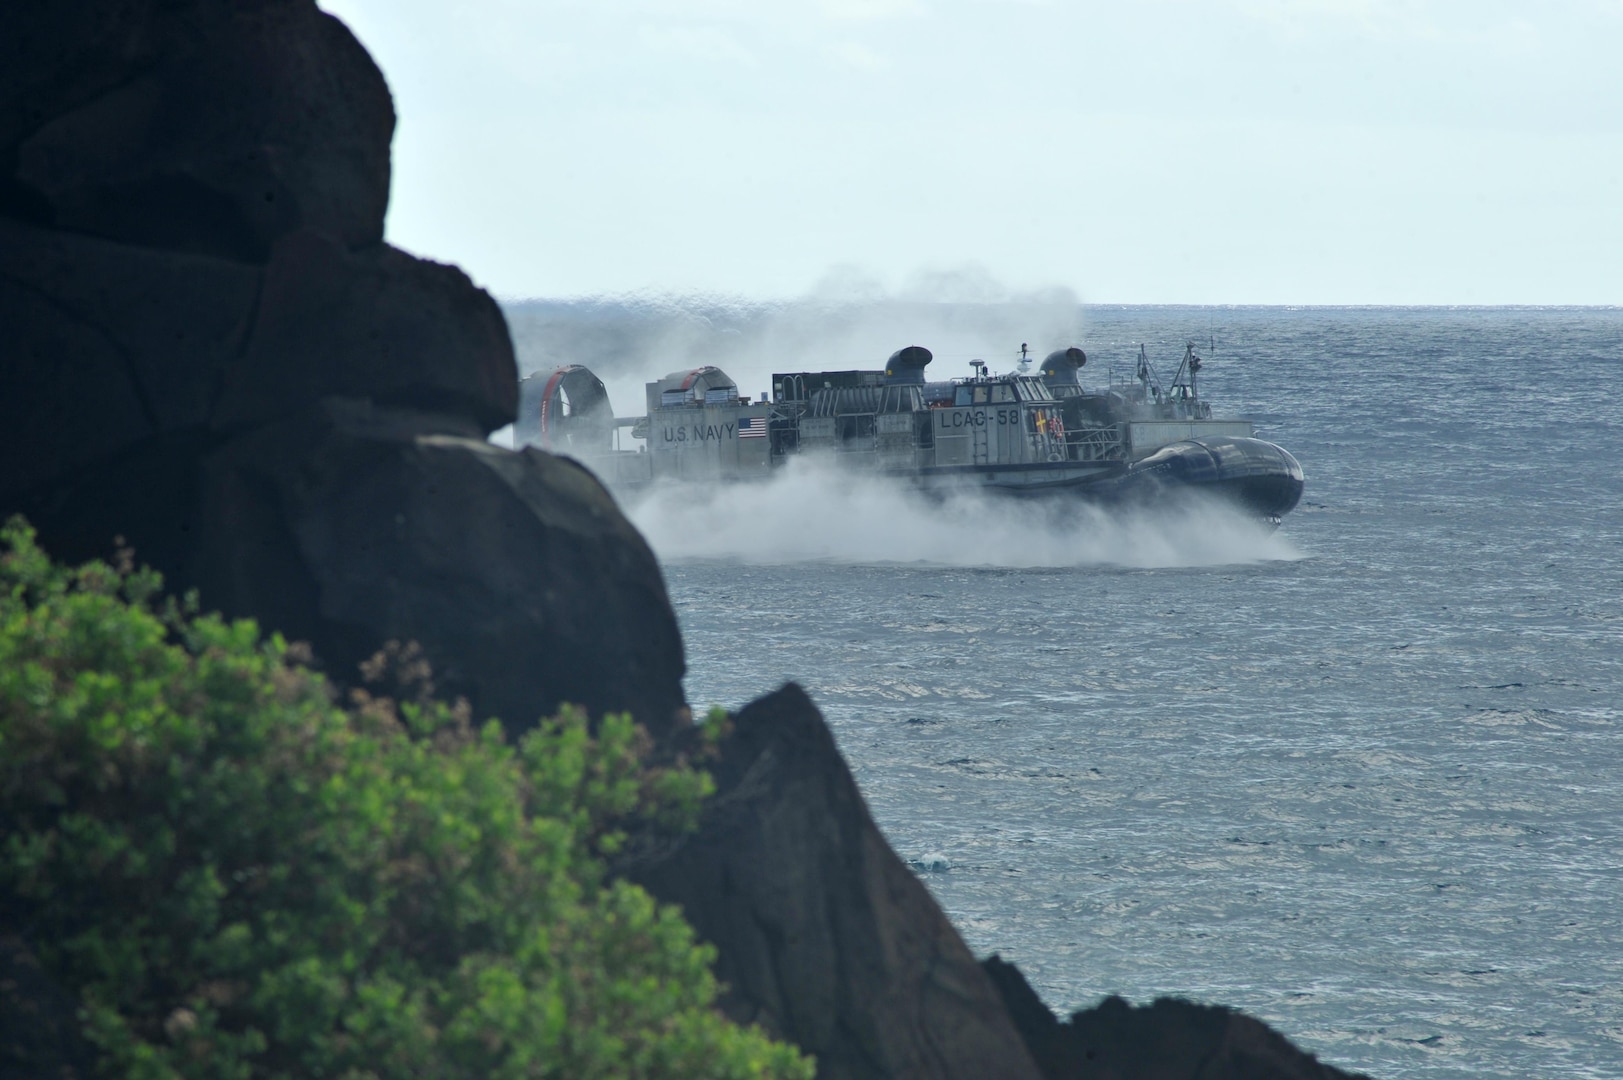 140729-N-UL721-082 MARINE CORPS BASE HAWAII (July 29, 2014) A U.S. Navy landing craft air cushion rehearses during a simulated beach assault during Rim of the Pacific (RIMPAC) Exercise 2014. Twenty-two nations, 49 ships, six submarines, more than 200 aircraft and 25,000 personnel are participating in RIMPAC from June 26 to Aug. 1, in and around the Hawaiian Islands and Southern California. The world's largest maritime exercise, RIMPAC provides a unique training opportunity that helps participants foster and sustain the cooperative relationships that are critical to ensuring the safety of sea lanes and security on the world's oceans. RIMPAC 2014 is the 24th exercise in the series that began in 1971. (U.S. Navy photo by Mass Communication Specialist 2nd Class Corey T. Jones/Released)